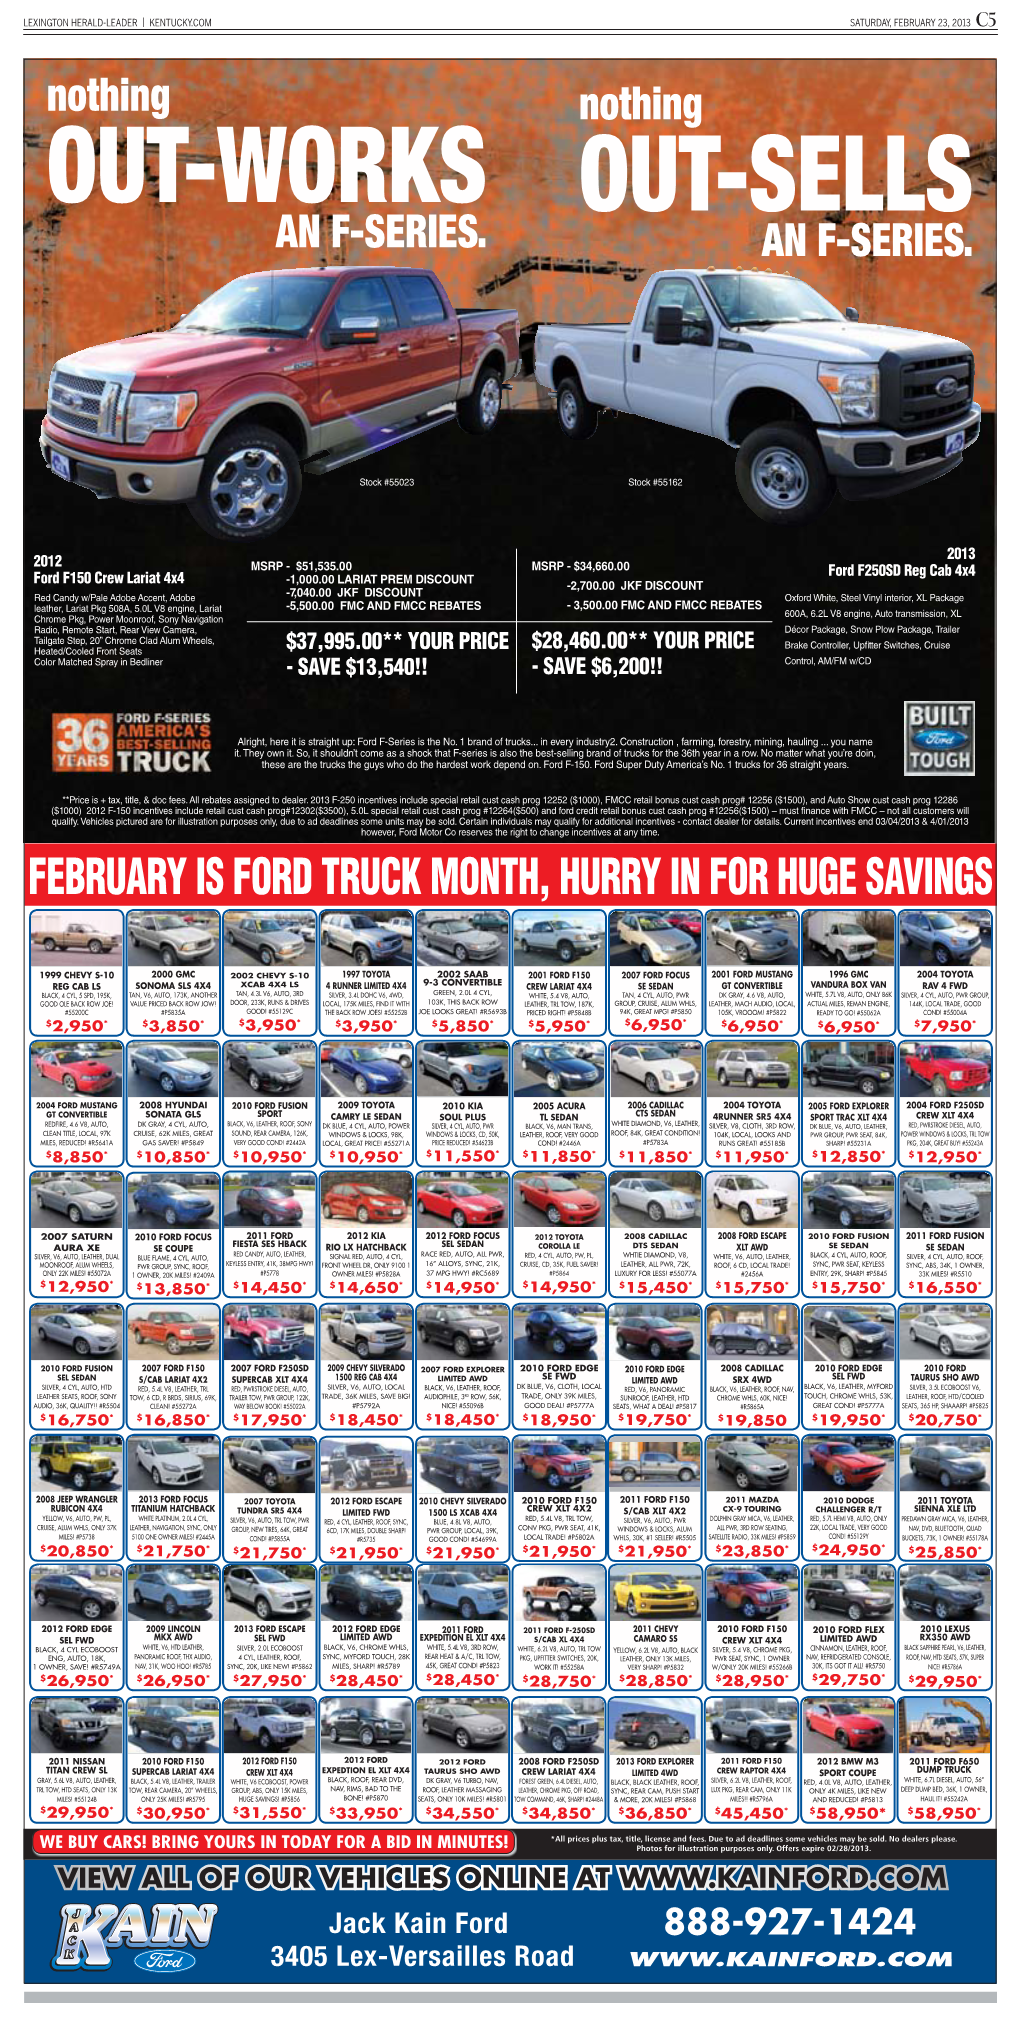 February Is Ford Truck Month, Hurry in for Huge Savings